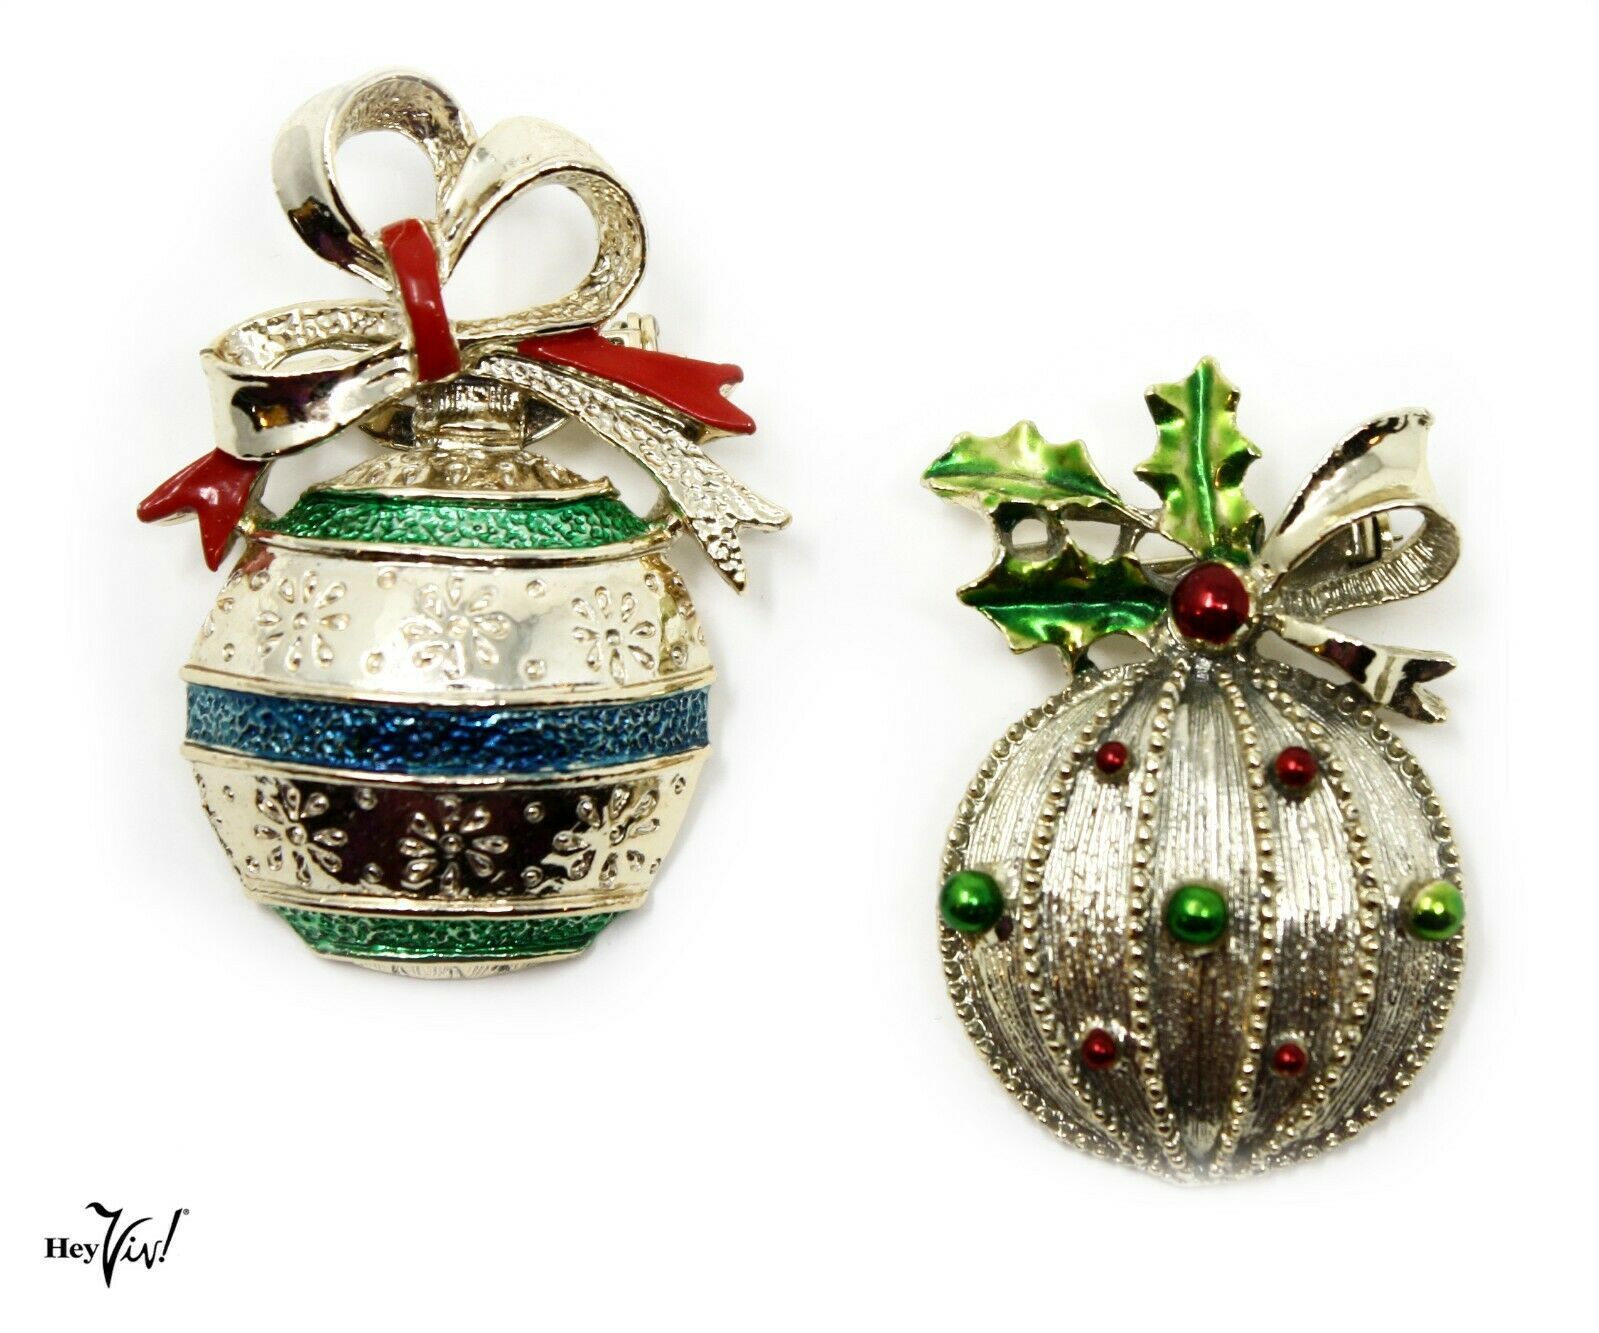 Primary image for Christmas Ornaments Vintage Pins - Gerrys - 2 Decorated Balls w Bows - Hey Viv